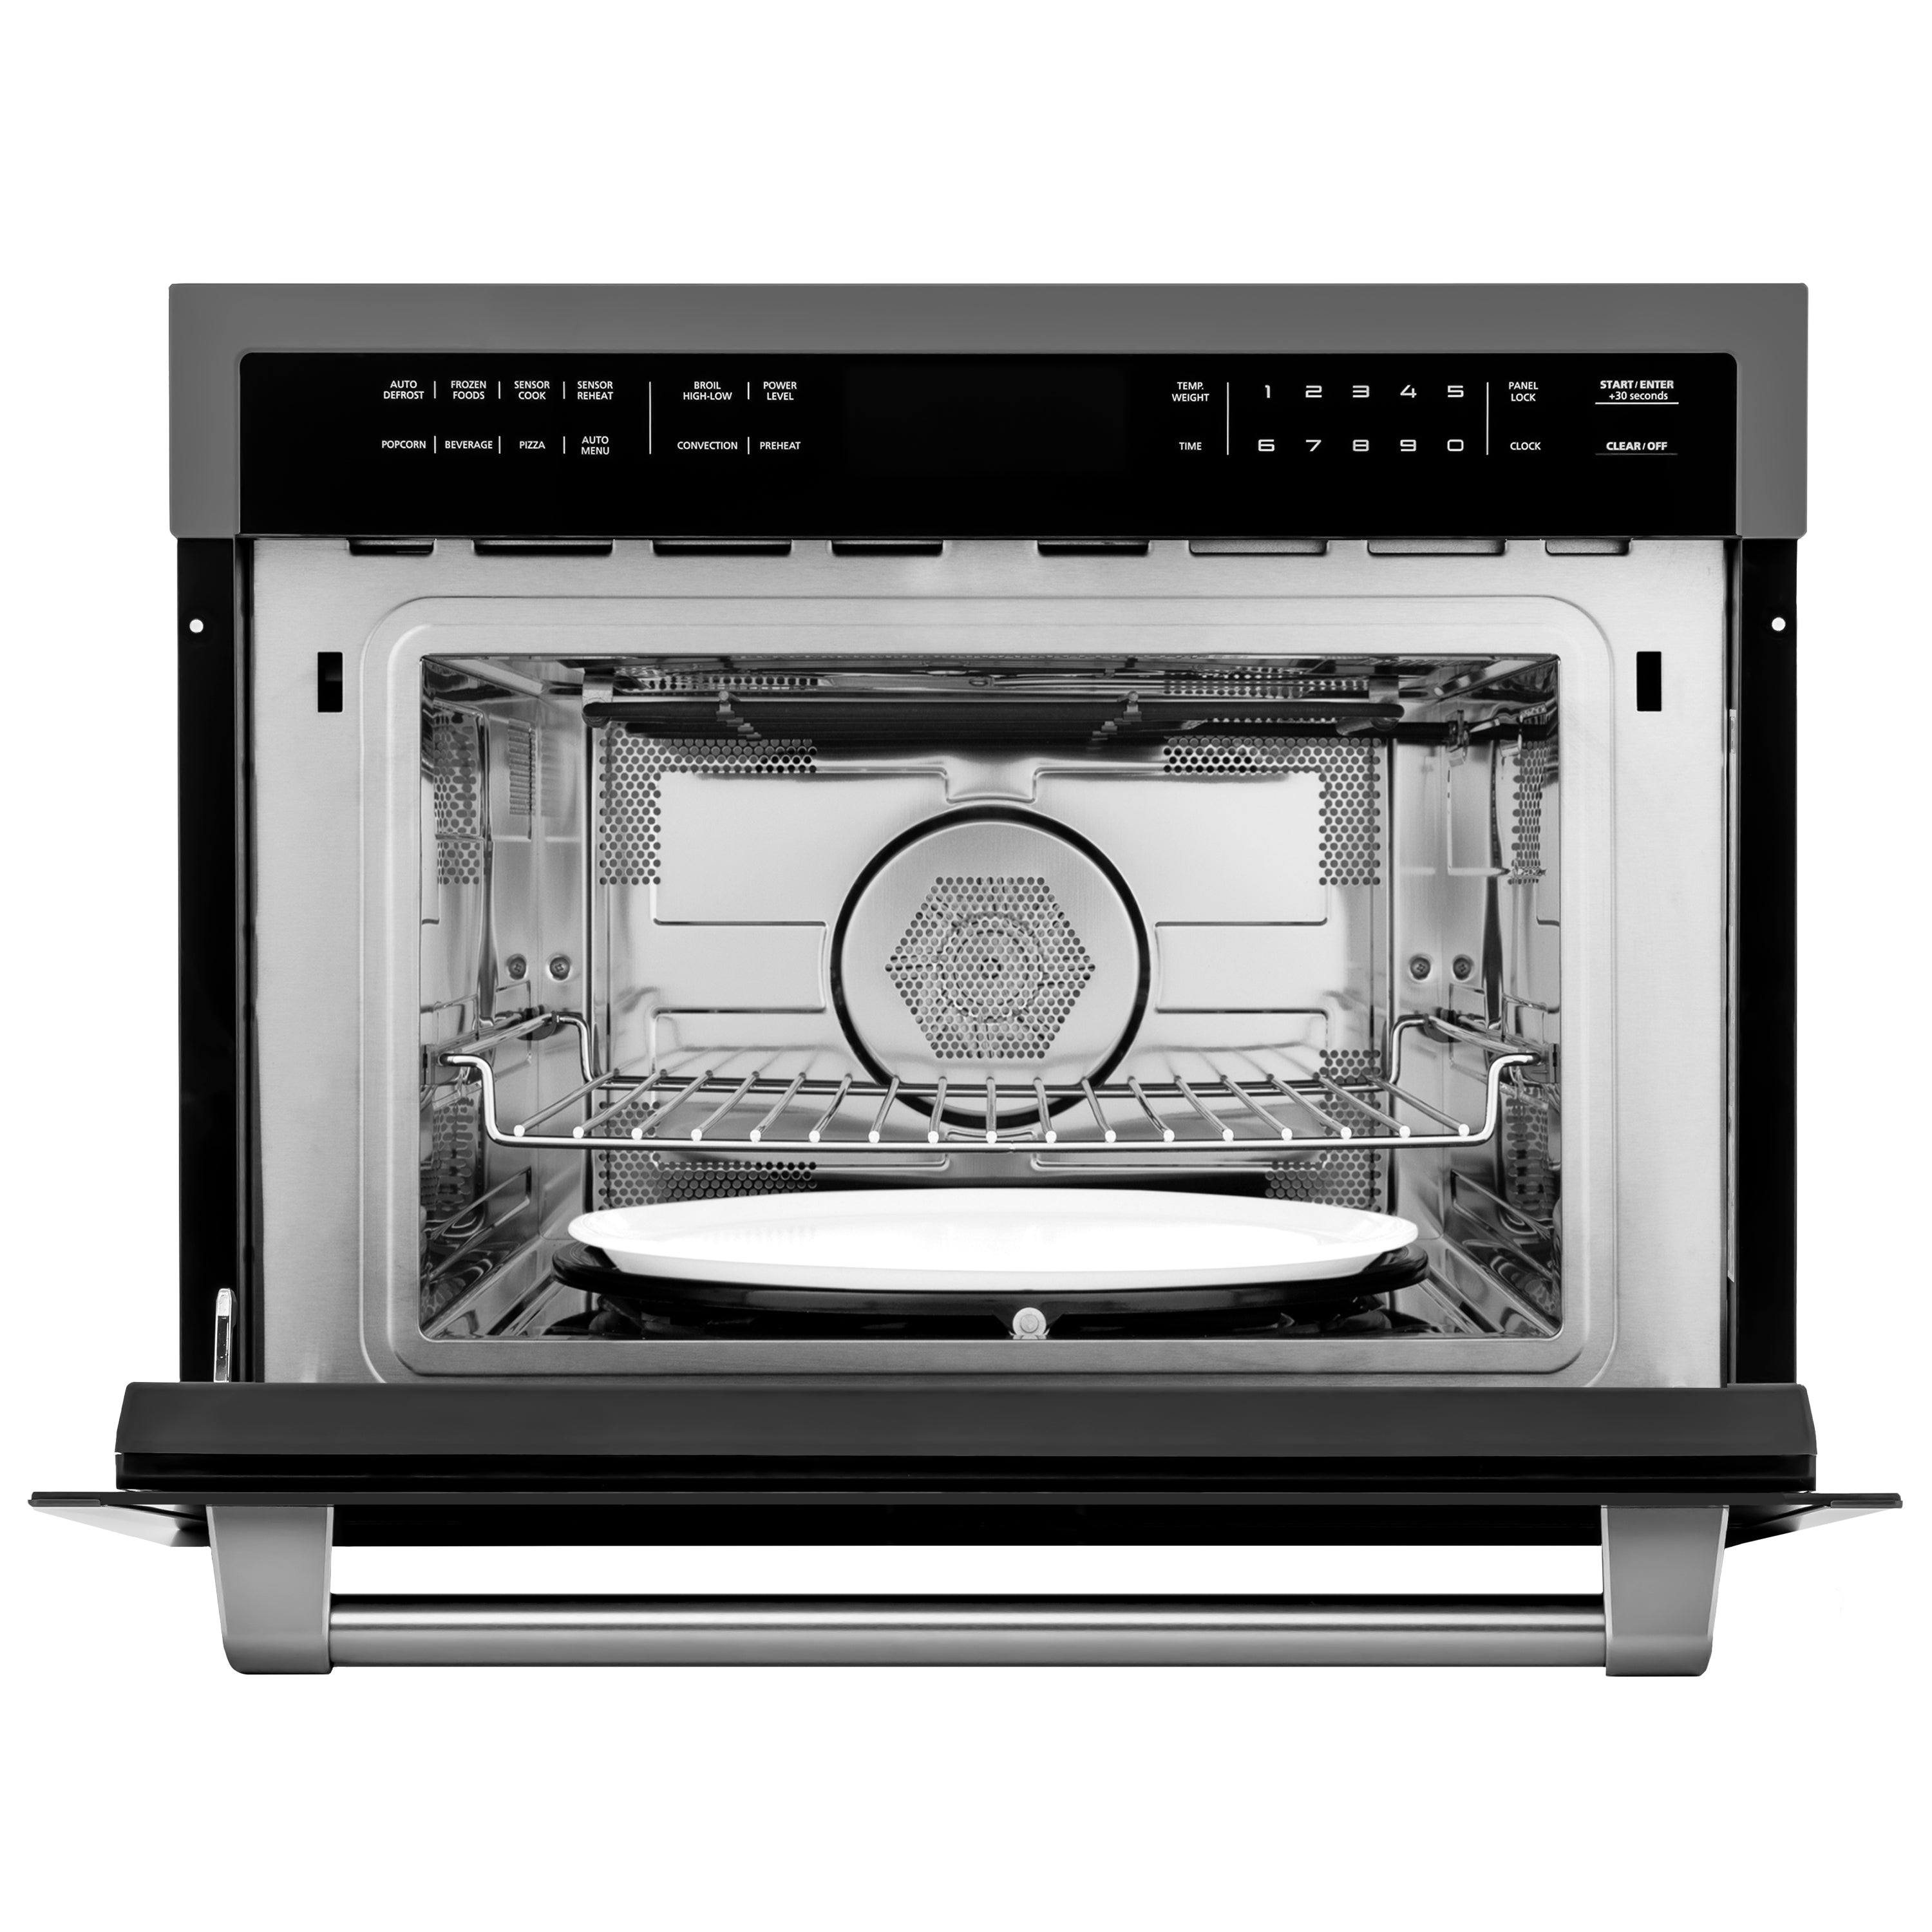 ZLINE 24" 1.6 cu ft. Built-in Convection Microwave Oven in Black Stainless Steel with Speed and Sensor Cooking